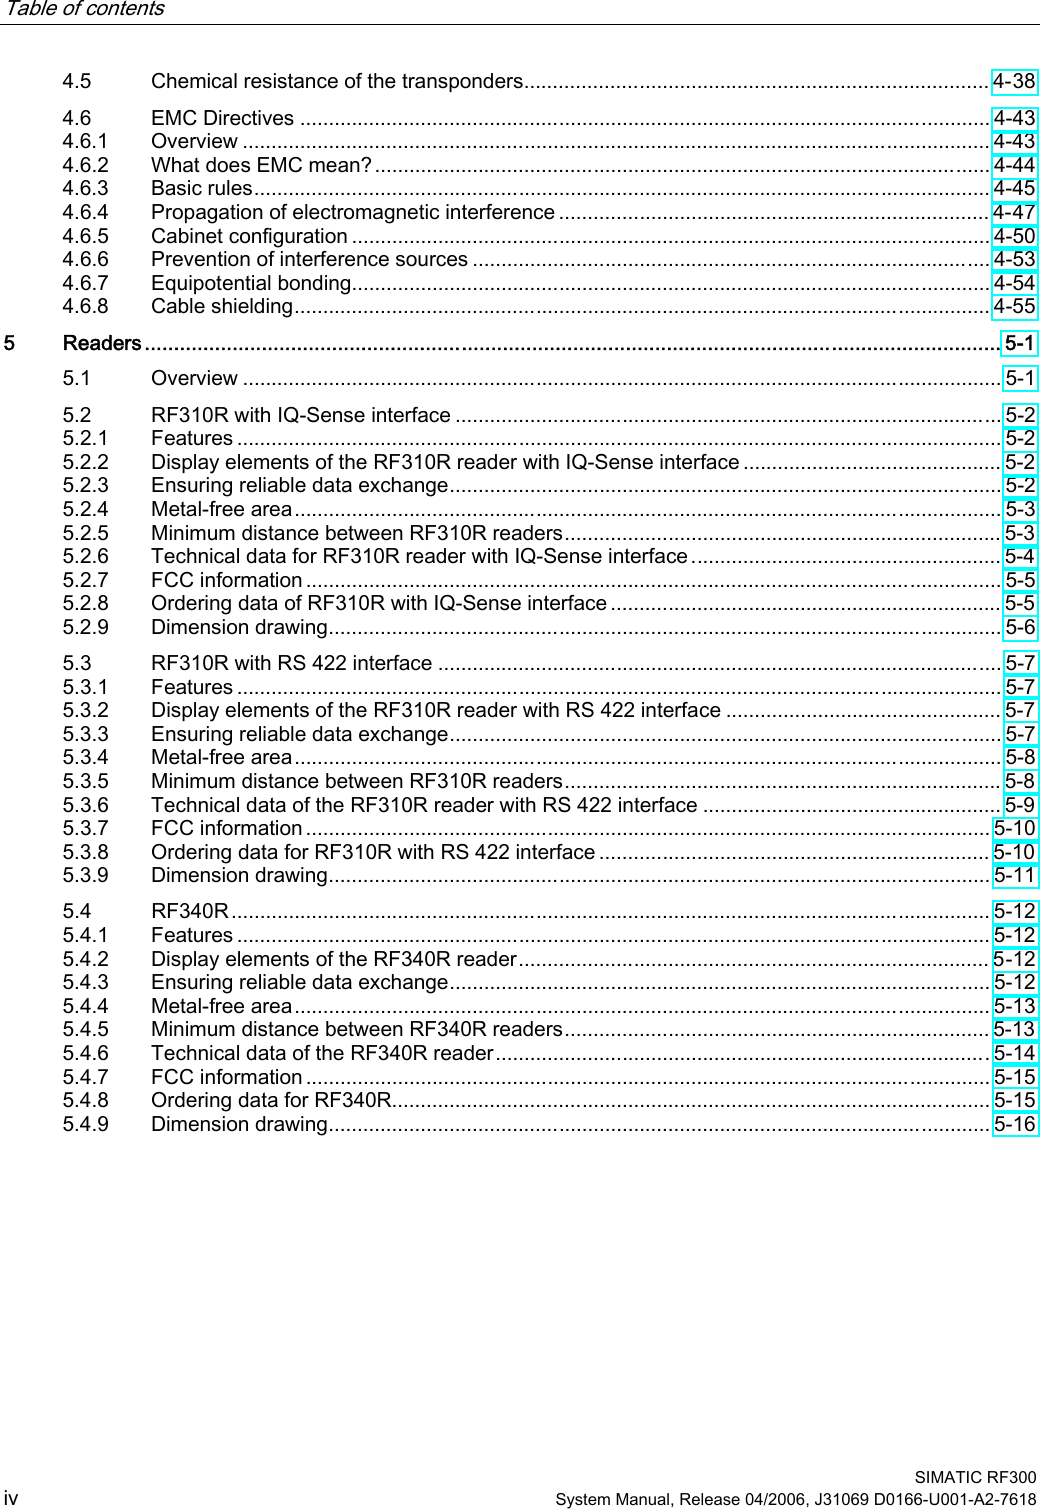 Table of contents    SIMATIC RF300 iv System Manual, Release 04/2006, J31069 D0166-U001-A2-7618 4.5  Chemical resistance of the transponders................................................................................. 4-38 4.6  EMC Directives ........................................................................................................................ 4-43 4.6.1  Overview .................................................................................................................................. 4-43 4.6.2  What does EMC mean?........................................................................................................... 4-44 4.6.3  Basic rules................................................................................................................................ 4-45 4.6.4  Propagation of electromagnetic interference ........................................................................... 4-47 4.6.5  Cabinet configuration ............................................................................................................... 4-50 4.6.6  Prevention of interference sources .......................................................................................... 4-53 4.6.7  Equipotential bonding............................................................................................................... 4-54 4.6.8  Cable shielding......................................................................................................................... 4-55 5  Readers.................................................................................................................................................. 5-1 5.1  Overview .................................................................................................................................... 5-1 5.2  RF310R with IQ-Sense interface ............................................................................................... 5-2 5.2.1  Features ..................................................................................................................................... 5-2 5.2.2  Display elements of the RF310R reader with IQ-Sense interface ............................................. 5-2 5.2.3  Ensuring reliable data exchange................................................................................................ 5-2 5.2.4  Metal-free area........................................................................................................................... 5-3 5.2.5  Minimum distance between RF310R readers............................................................................ 5-3 5.2.6  Technical data for RF310R reader with IQ-Sense interface...................................................... 5-4 5.2.7  FCC information ......................................................................................................................... 5-5 5.2.8  Ordering data of RF310R with IQ-Sense interface .................................................................... 5-5 5.2.9  Dimension drawing..................................................................................................................... 5-6 5.3  RF310R with RS 422 interface .................................................................................................. 5-7 5.3.1  Features ..................................................................................................................................... 5-7 5.3.2  Display elements of the RF310R reader with RS 422 interface ................................................ 5-7 5.3.3  Ensuring reliable data exchange................................................................................................ 5-7 5.3.4  Metal-free area........................................................................................................................... 5-8 5.3.5  Minimum distance between RF310R readers............................................................................ 5-8 5.3.6  Technical data of the RF310R reader with RS 422 interface .................................................... 5-9 5.3.7  FCC information ....................................................................................................................... 5-10 5.3.8  Ordering data for RF310R with RS 422 interface .................................................................... 5-10 5.3.9  Dimension drawing................................................................................................................... 5-11 5.4  RF340R.................................................................................................................................... 5-12 5.4.1  Features ................................................................................................................................... 5-12 5.4.2  Display elements of the RF340R reader.................................................................................. 5-12 5.4.3  Ensuring reliable data exchange.............................................................................................. 5-12 5.4.4  Metal-free area......................................................................................................................... 5-13 5.4.5  Minimum distance between RF340R readers.......................................................................... 5-13 5.4.6  Technical data of the RF340R reader...................................................................................... 5-14 5.4.7  FCC information ....................................................................................................................... 5-15 5.4.8  Ordering data for RF340R........................................................................................................ 5-15 5.4.9  Dimension drawing................................................................................................................... 5-16 